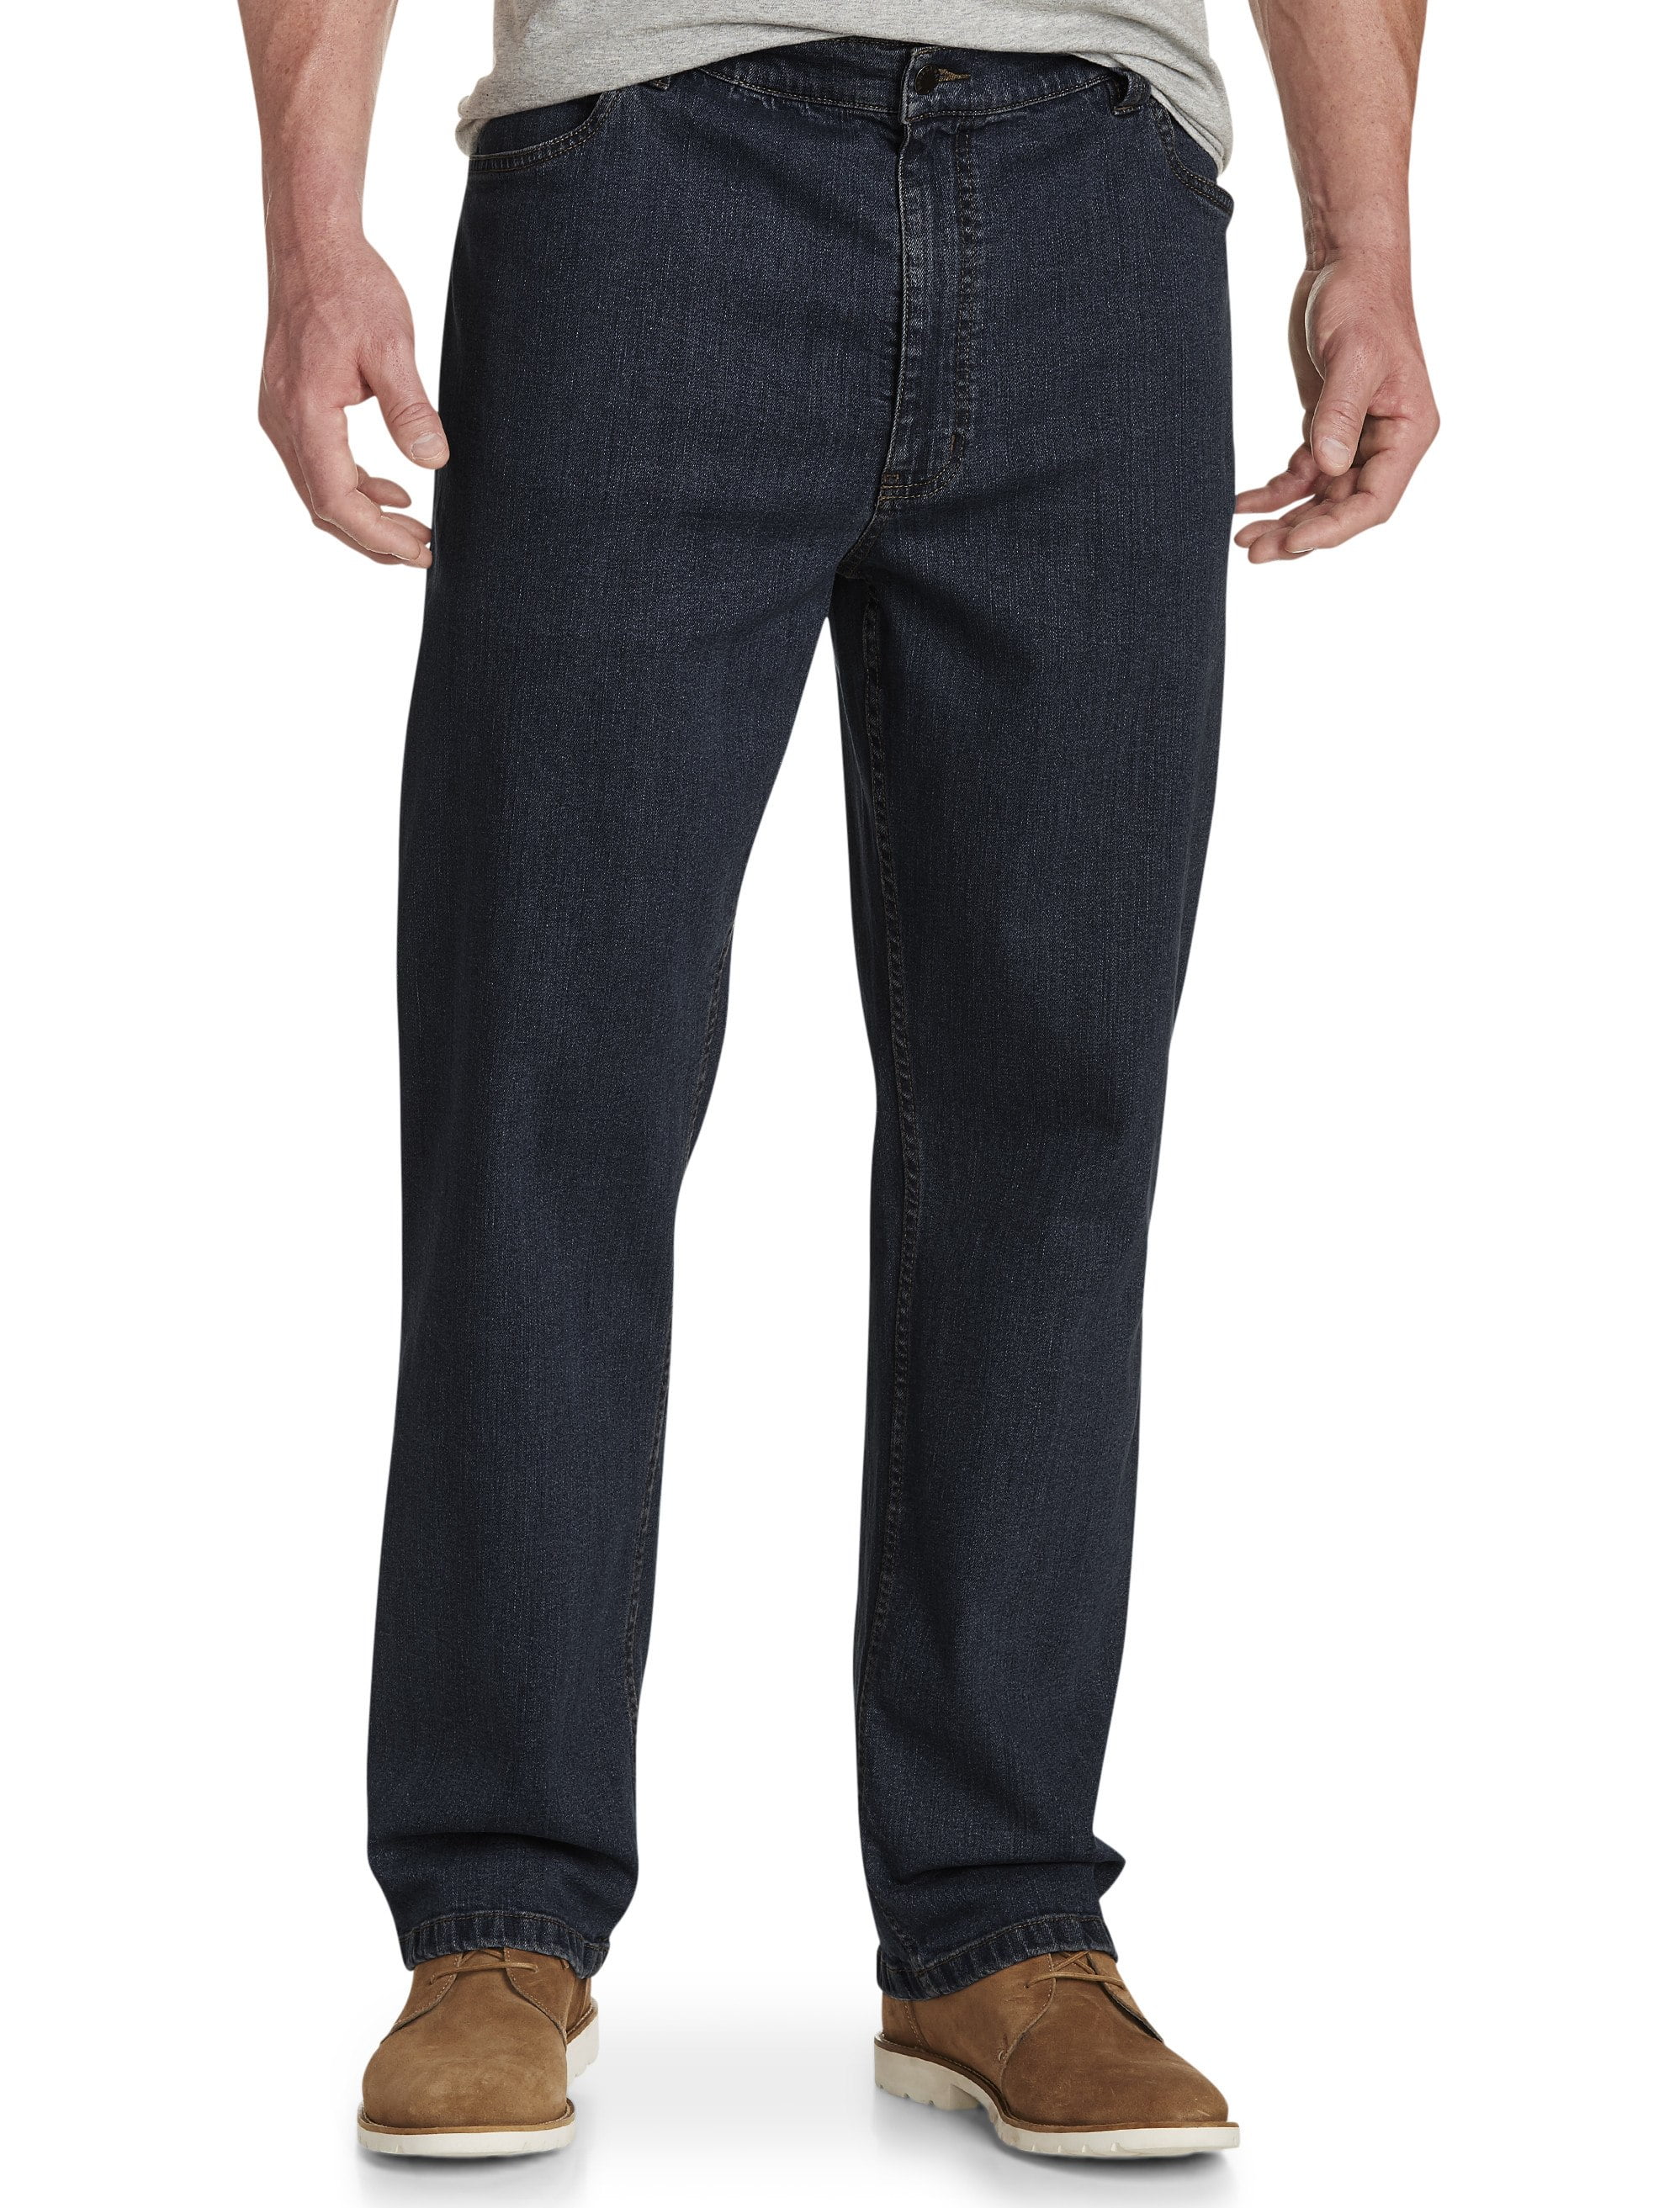 Harbor Bay by DXL Big and Tall Men's Athletic-Fit Jeans, Dark Rinse ...